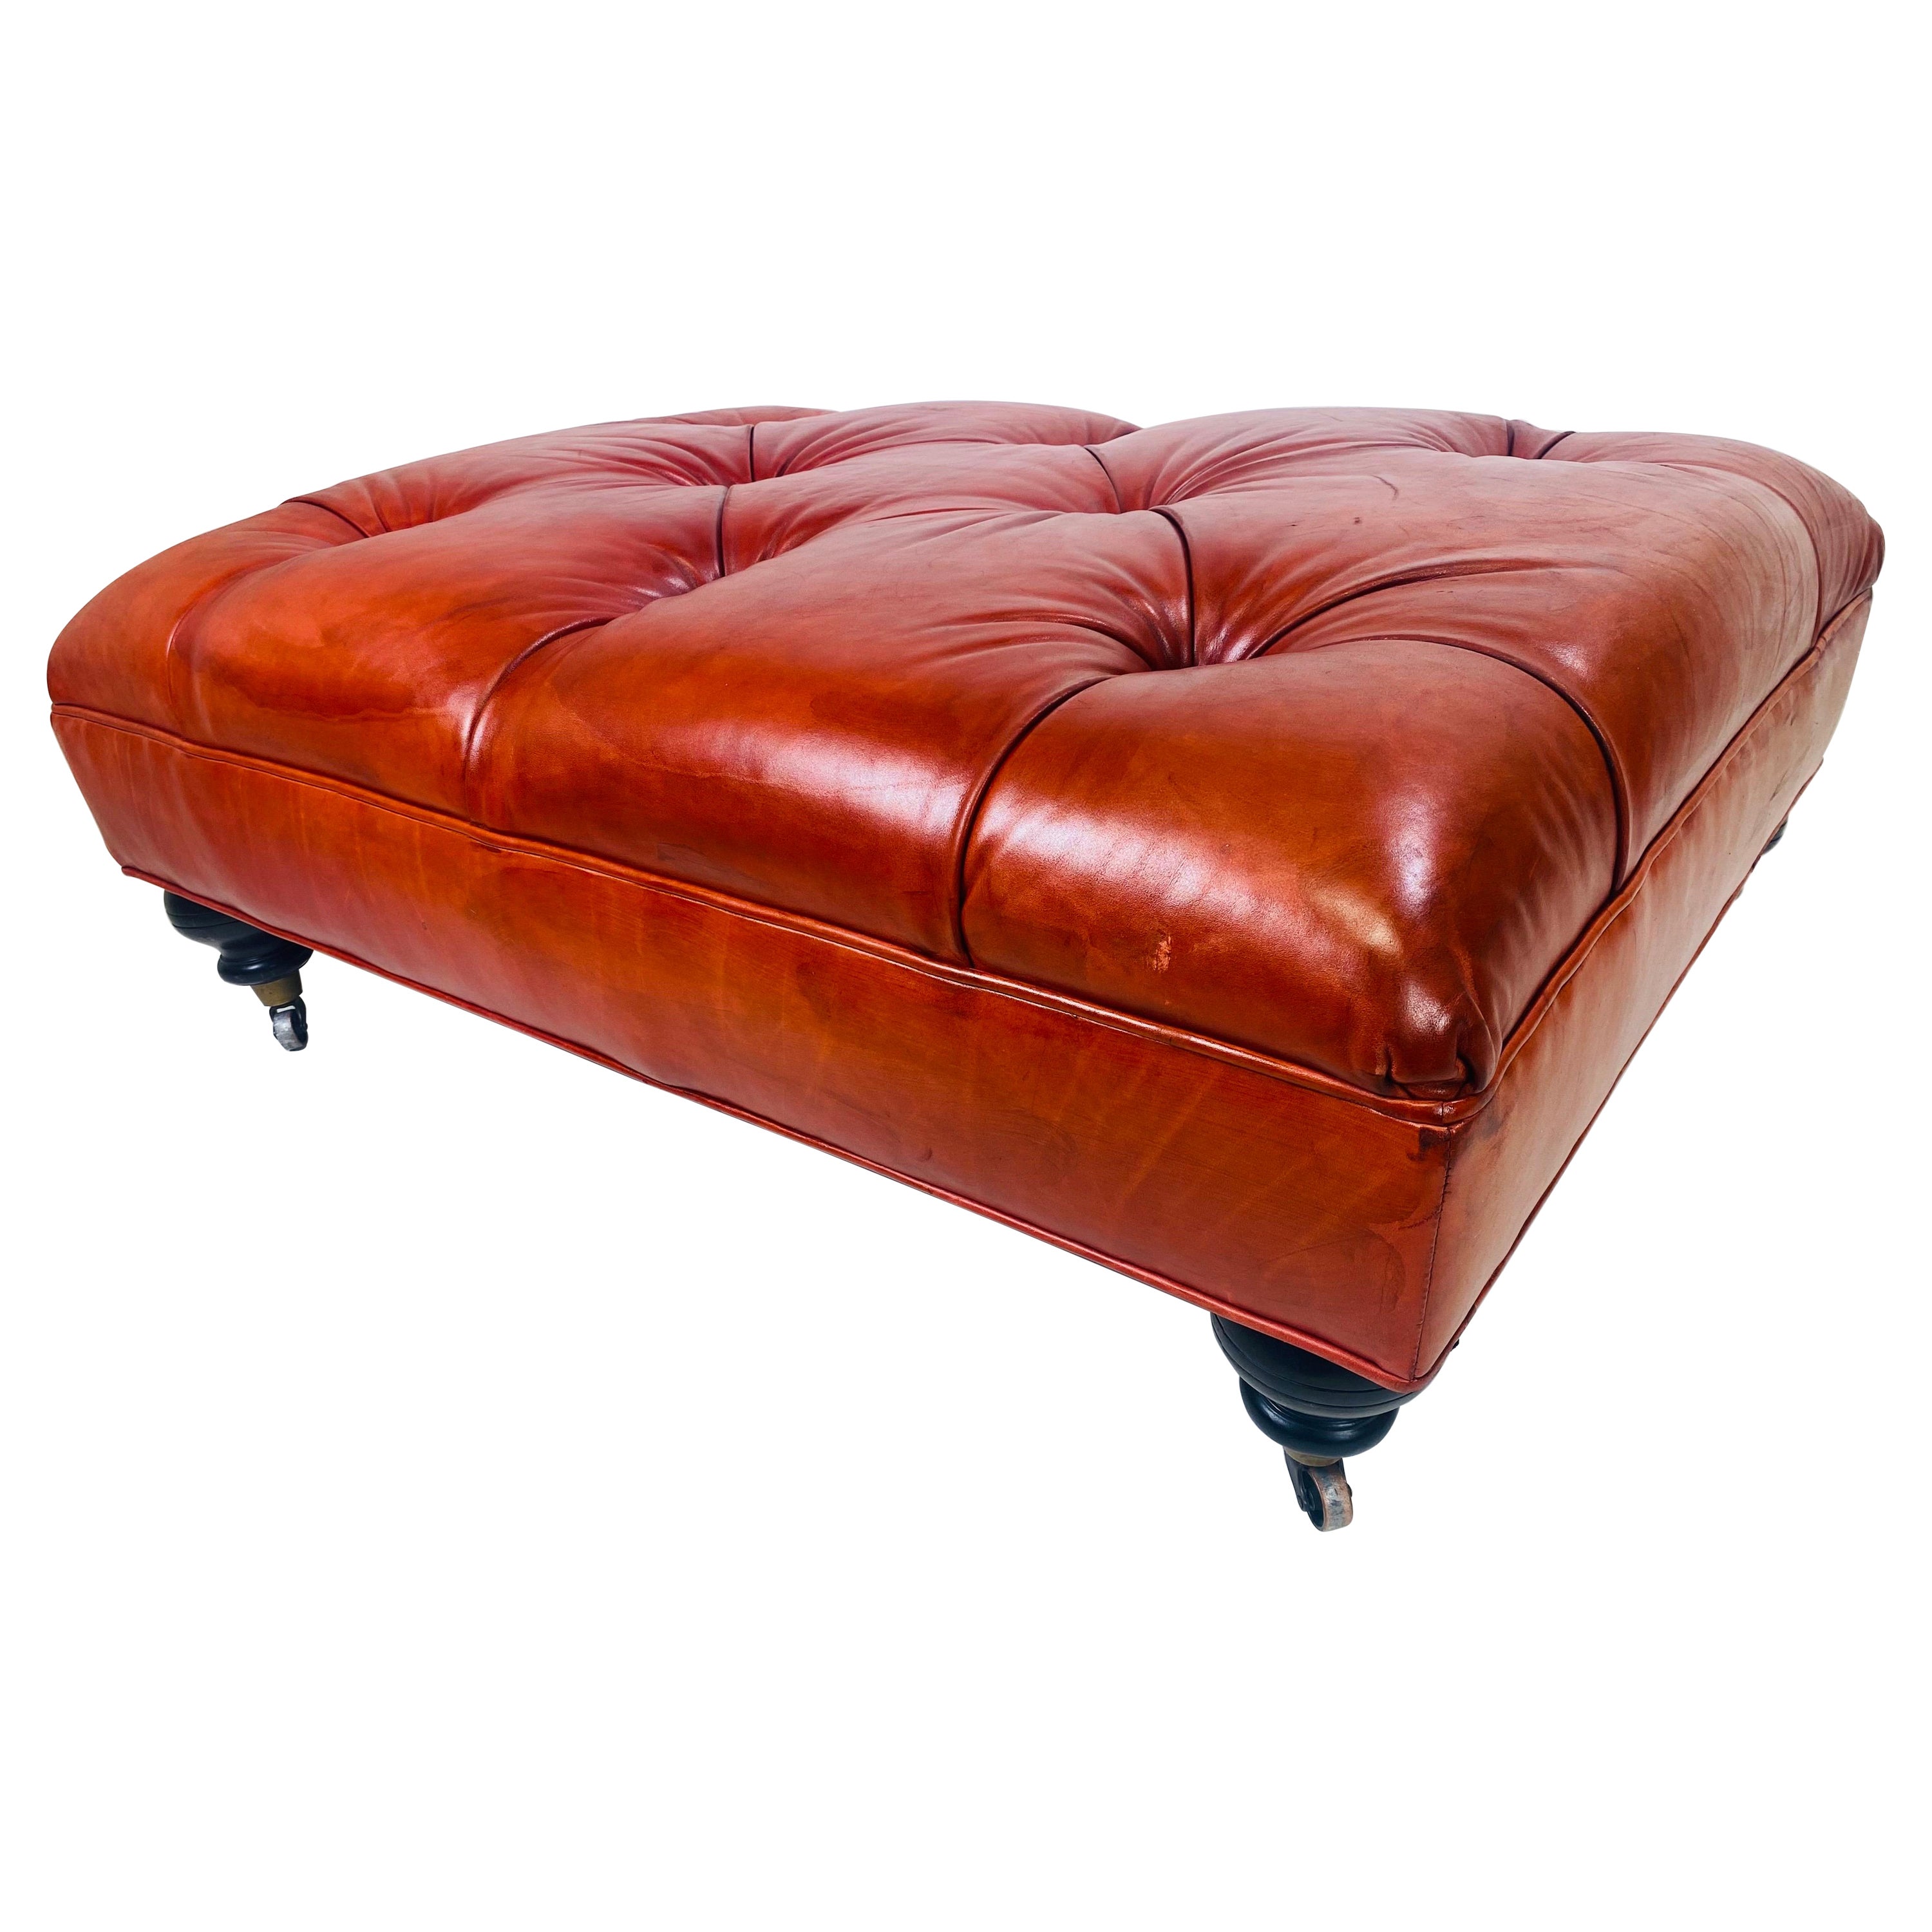 Vintage English traditional style tufted leather ottoman.